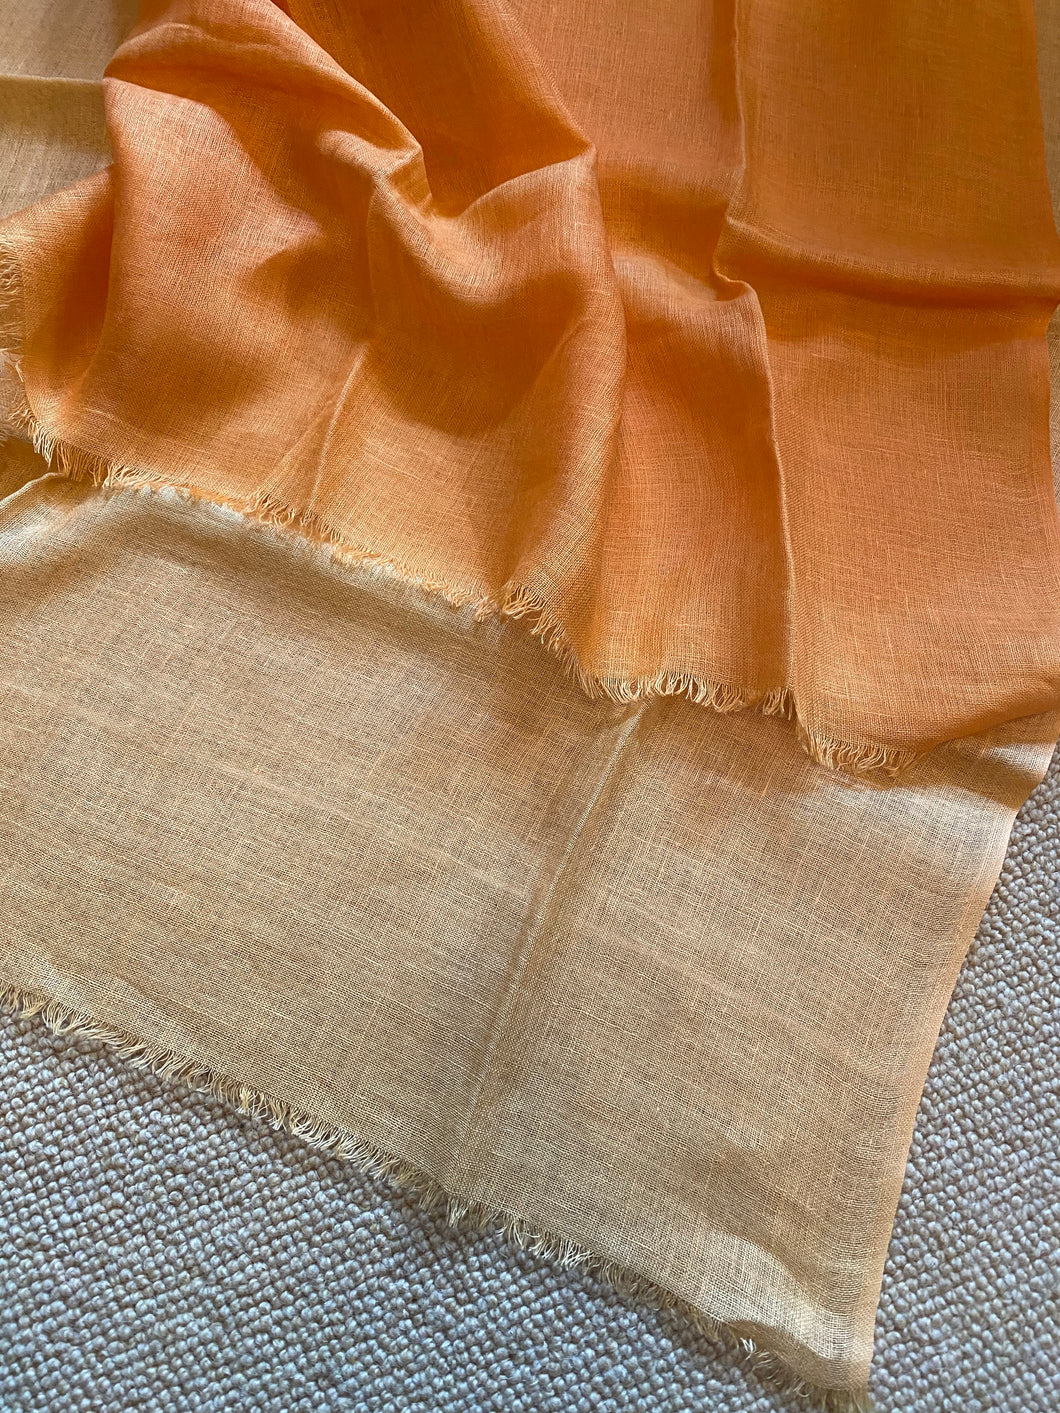 SP104 Light linen scarf in tones of tangerine and peach